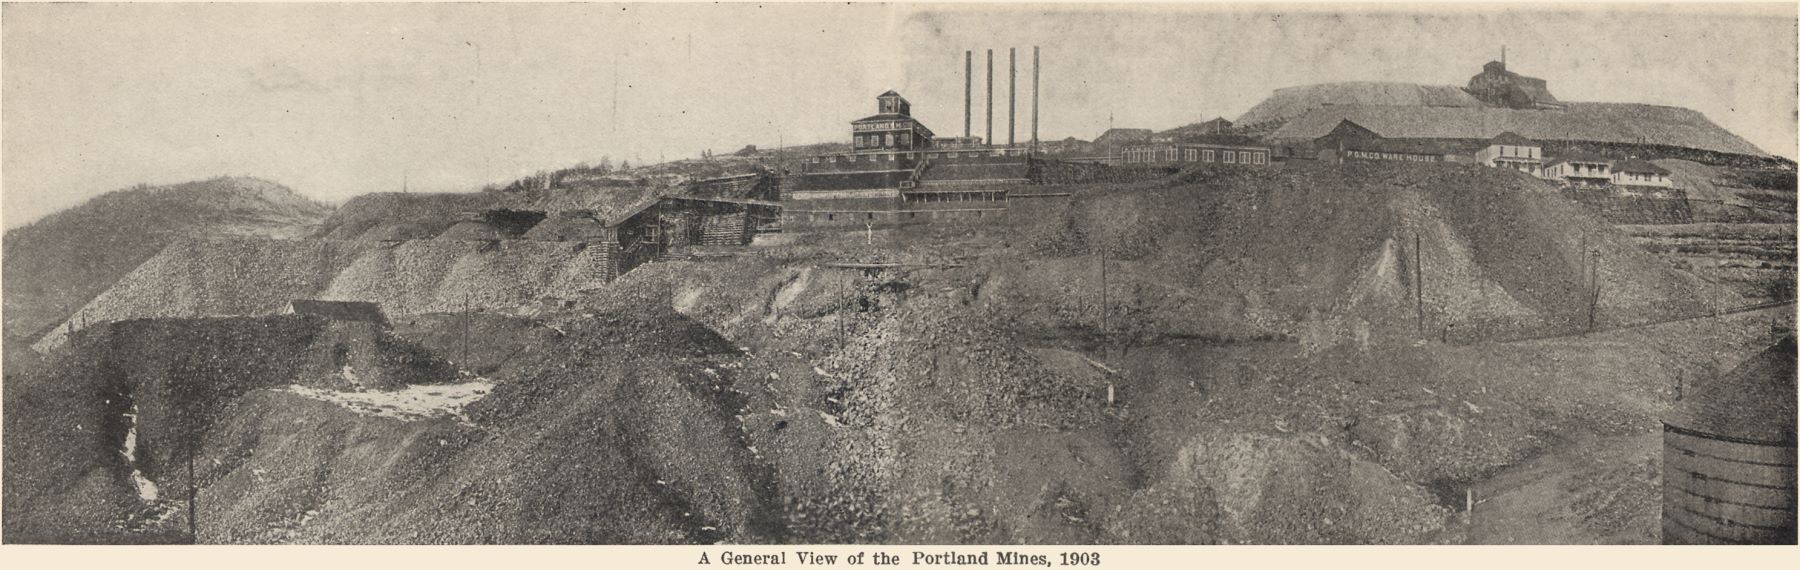 General view of the Portland Mines in 1903